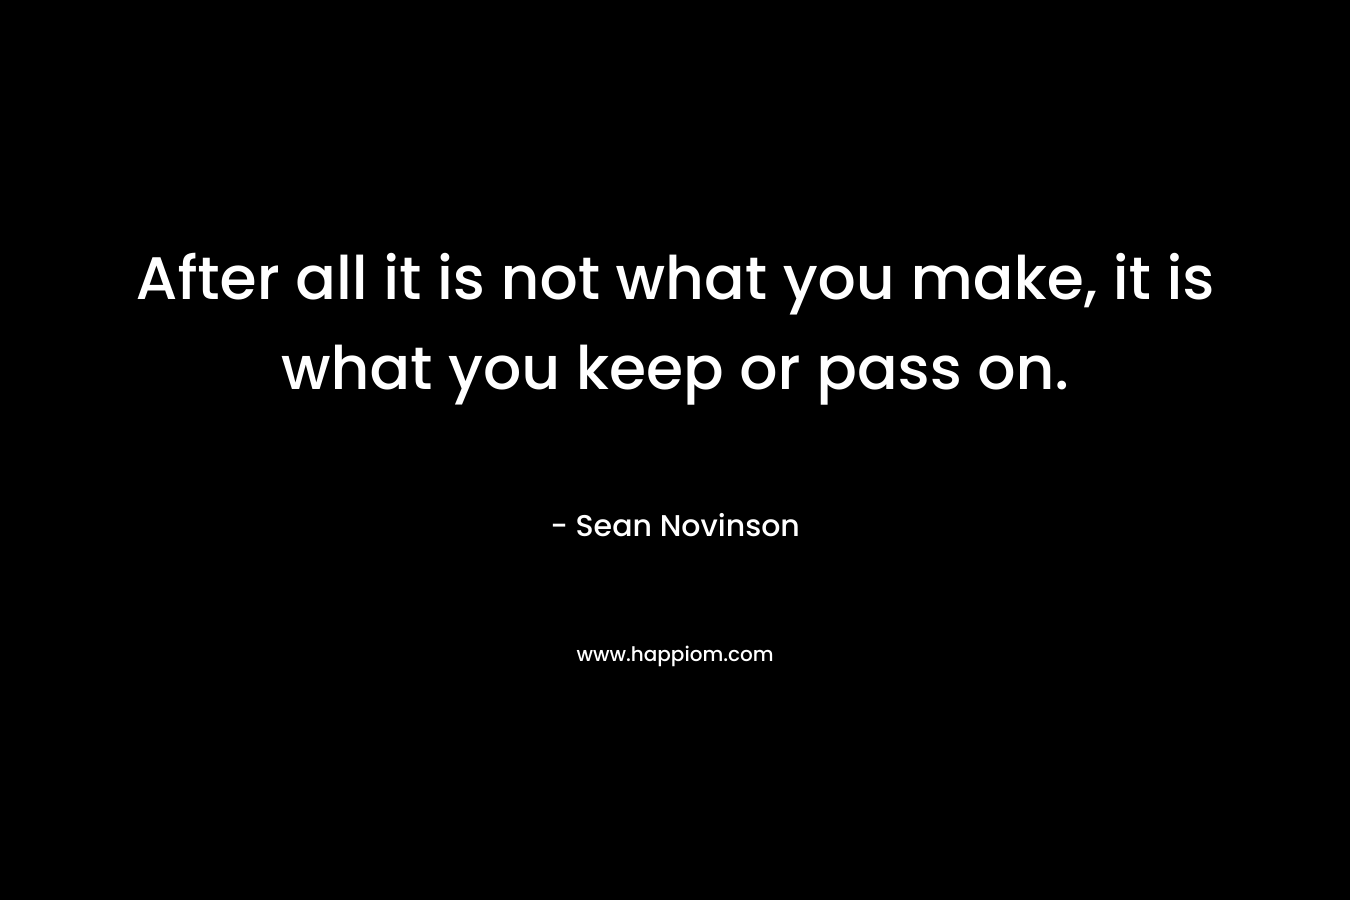 After all it is not what you make, it is what you keep or pass on. – Sean Novinson